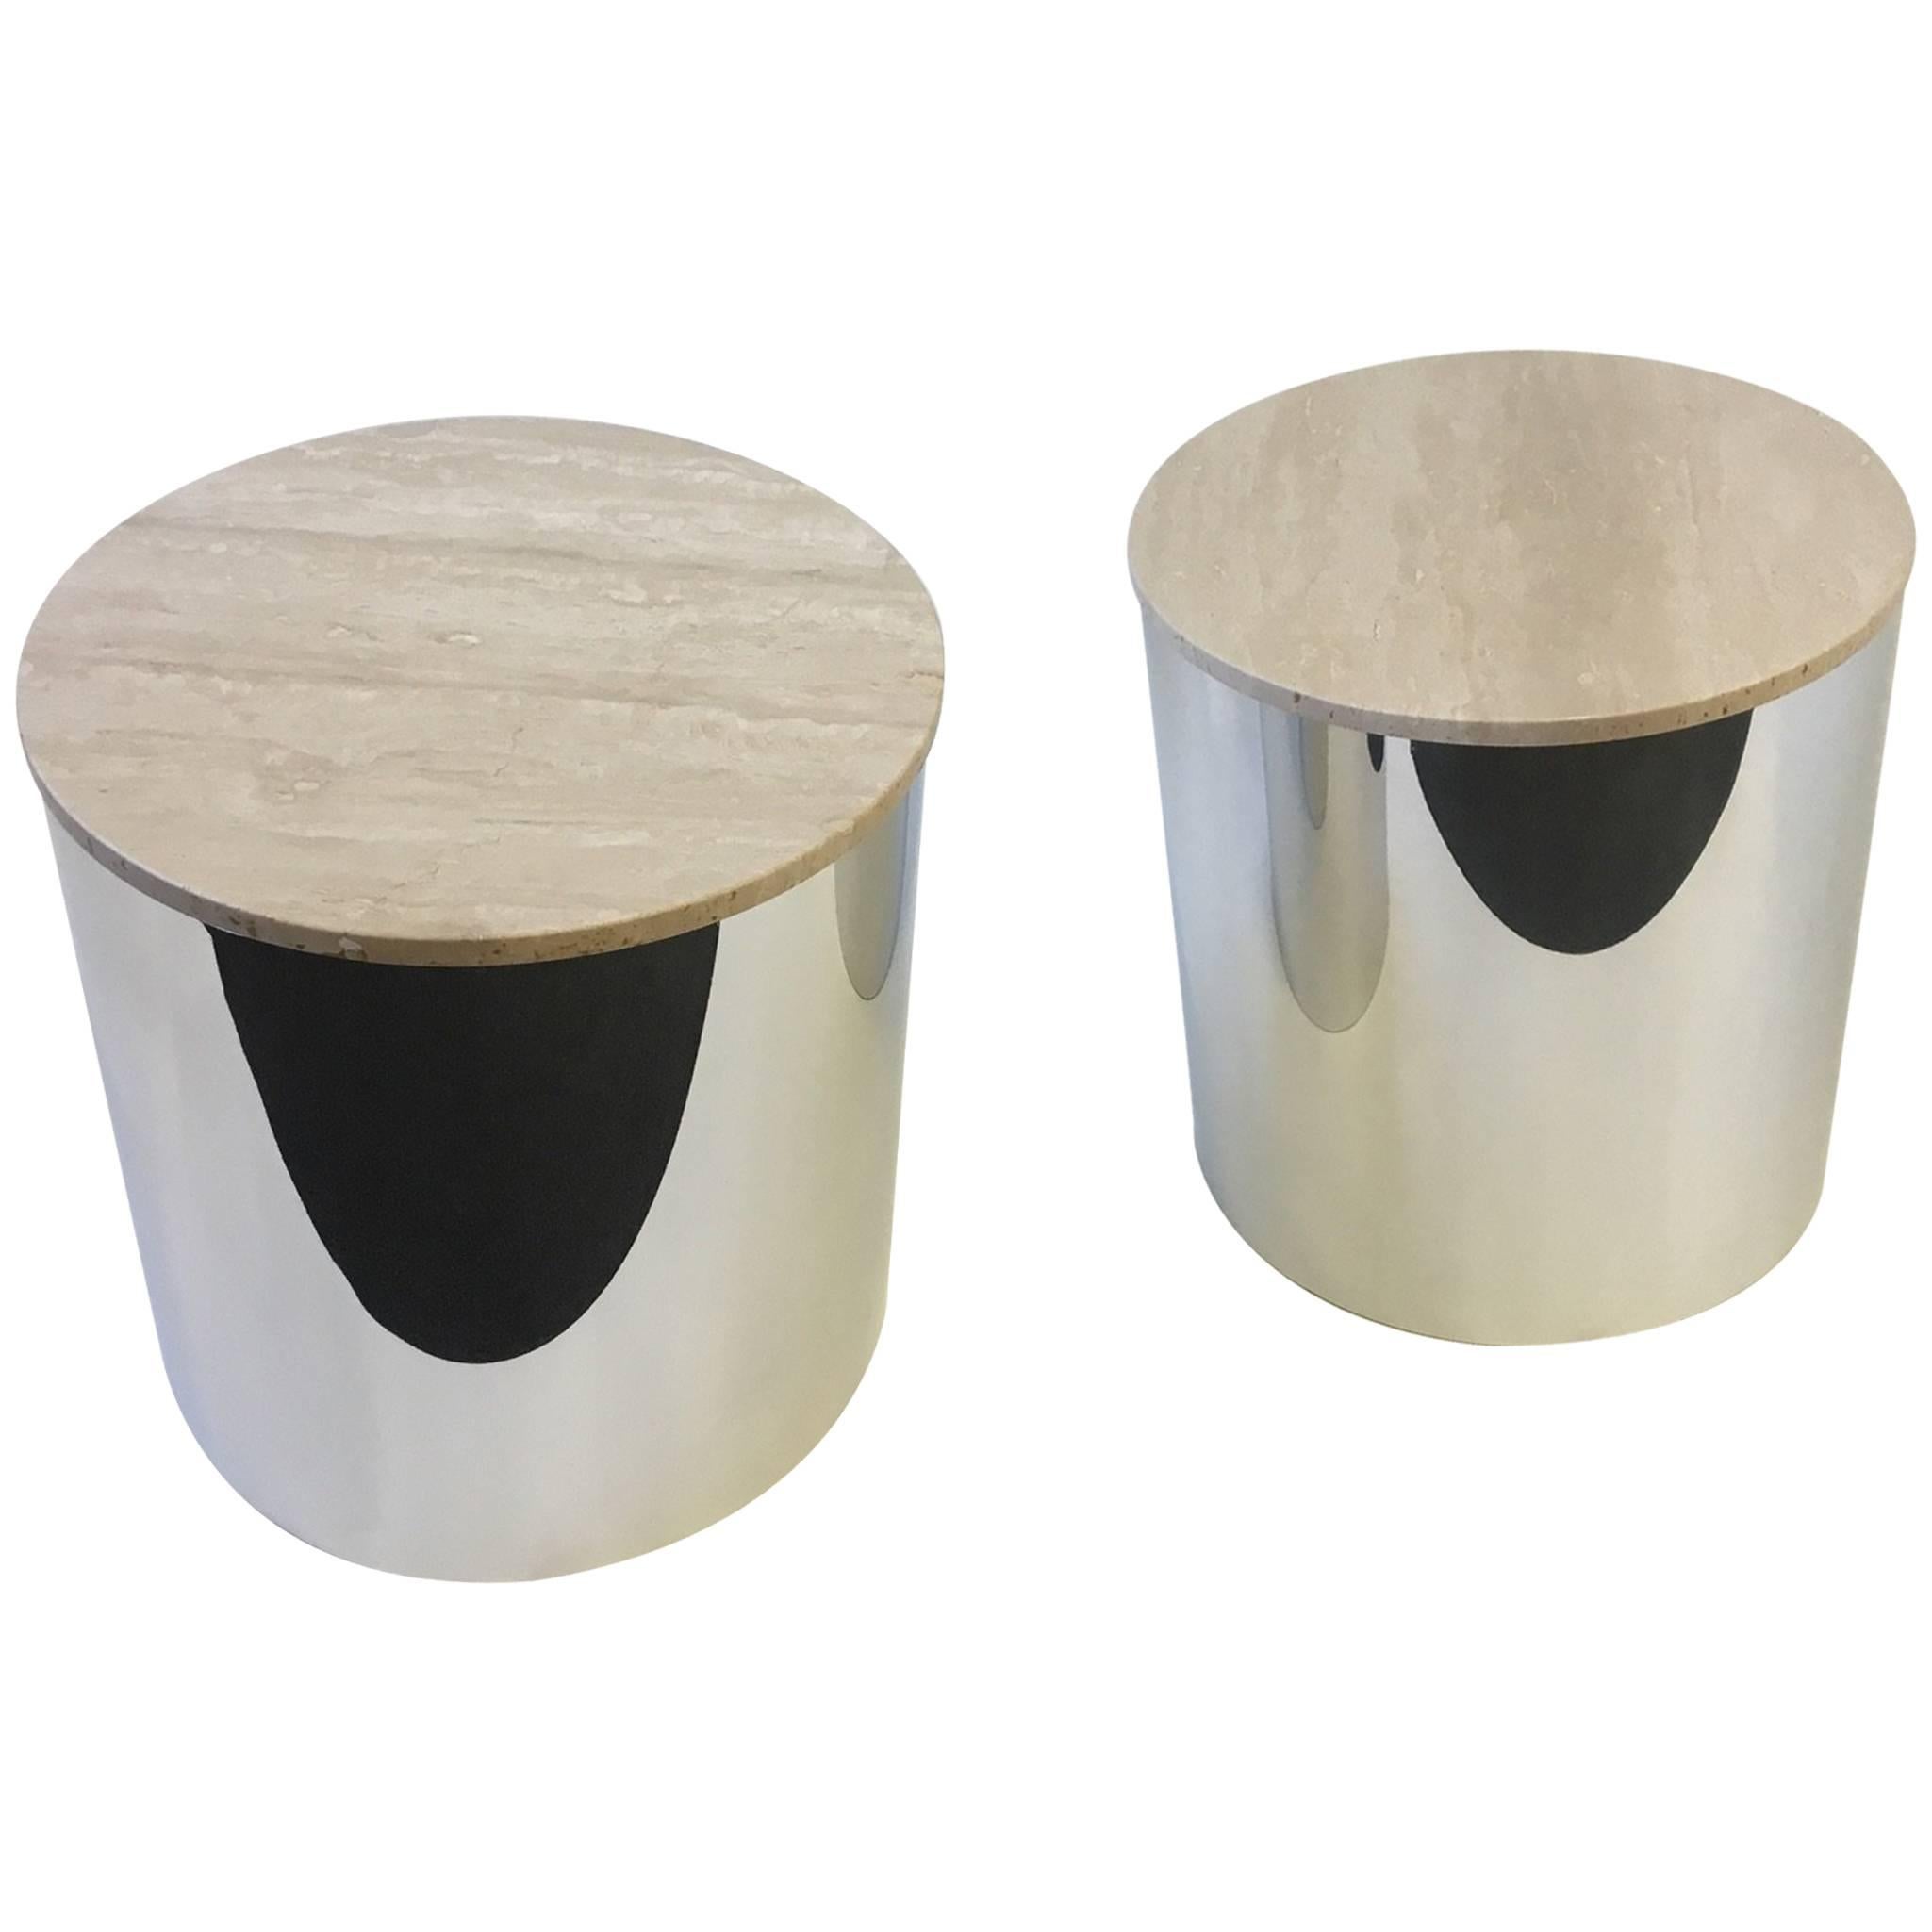 Pair of Italian Travertine and Polished Aluminum Drum Tables by Paul Mayen